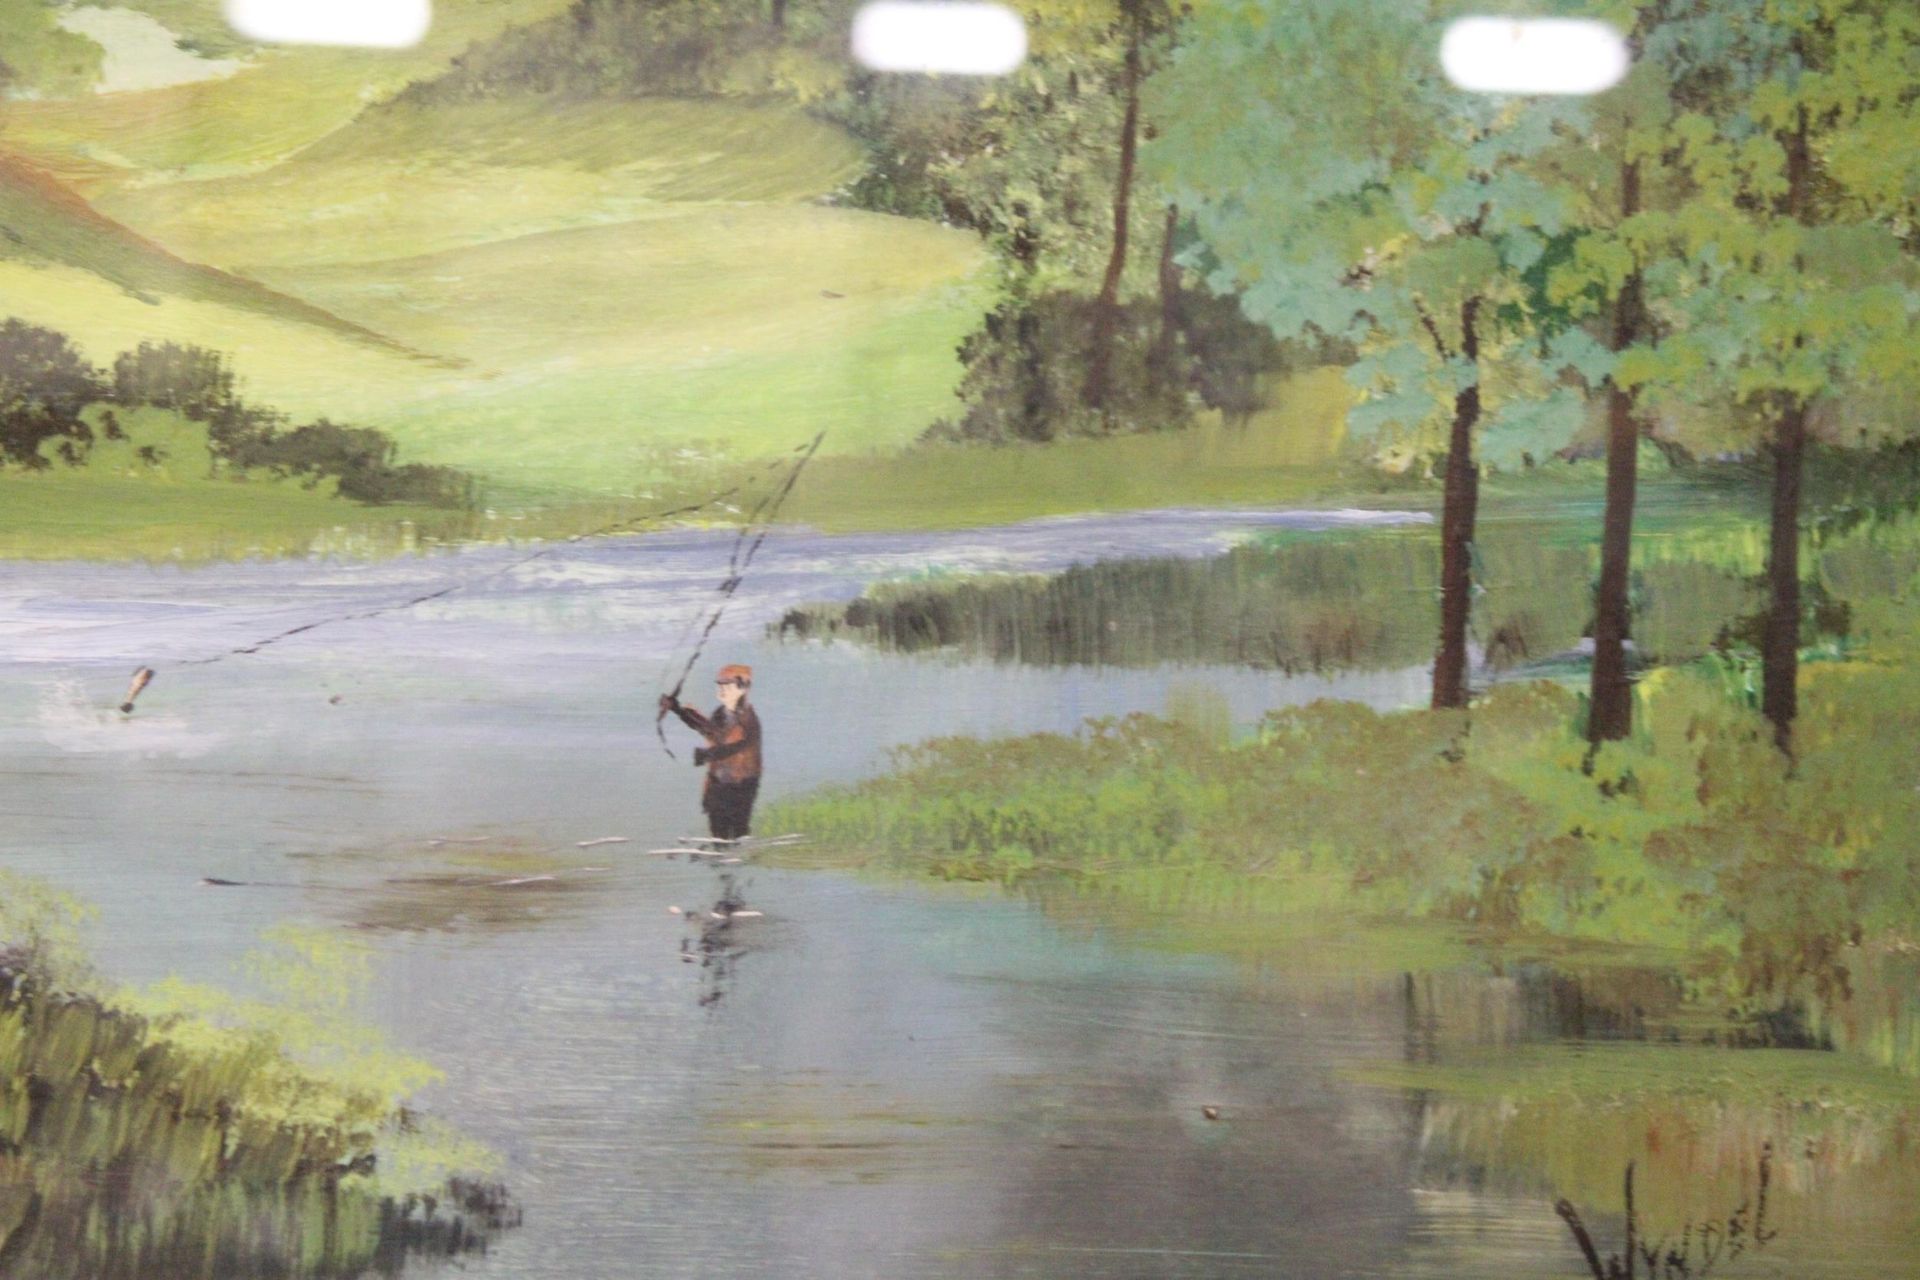 AFRAMED OIL PAINTING, 'THE TROUT FISHERMAN', SIGNED, WYNDEL, 23" X 19" - Image 2 of 6